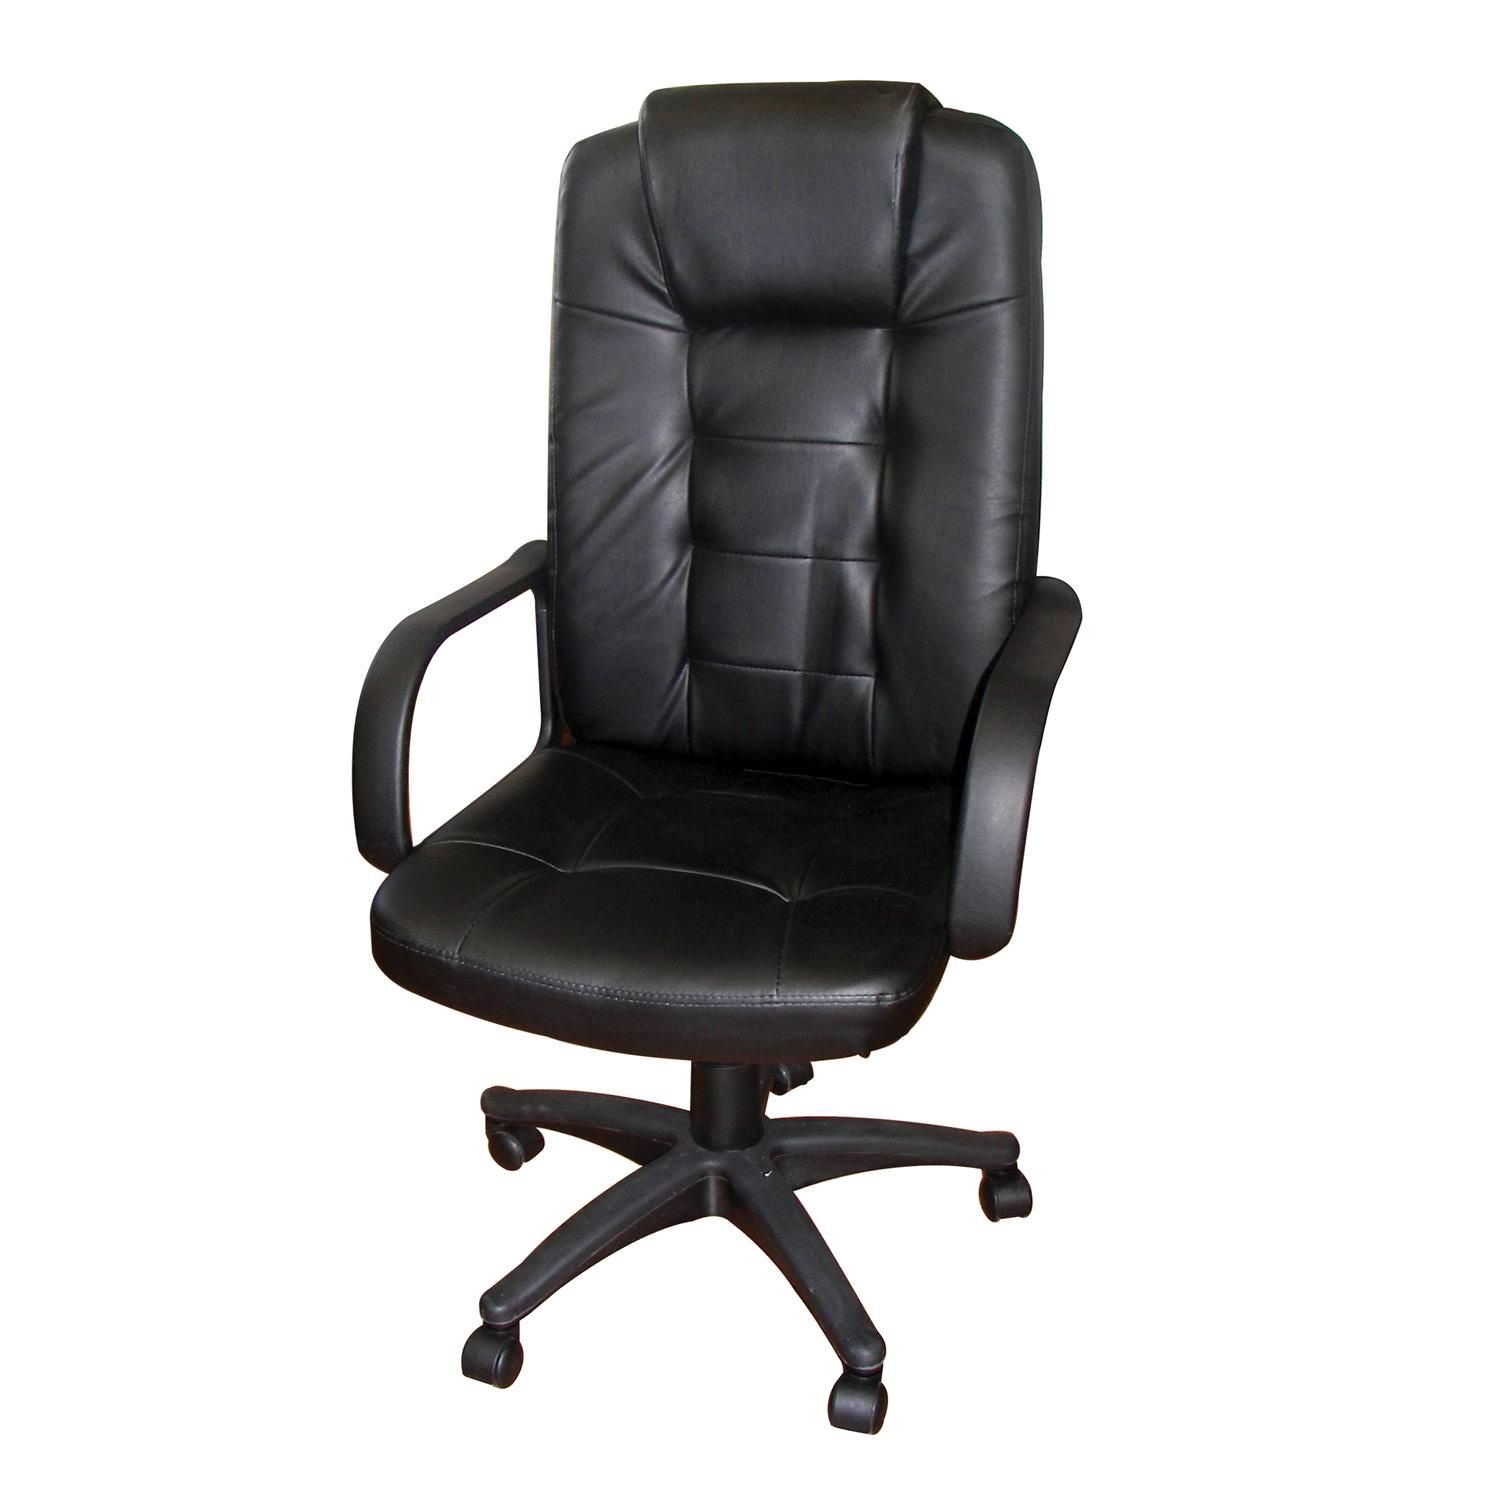 Home Source Bradley Black Faux Leather Swivel Office Chair With 5 Pertaining To Black Faux Leather Swivel Recliners (View 19 of 20)